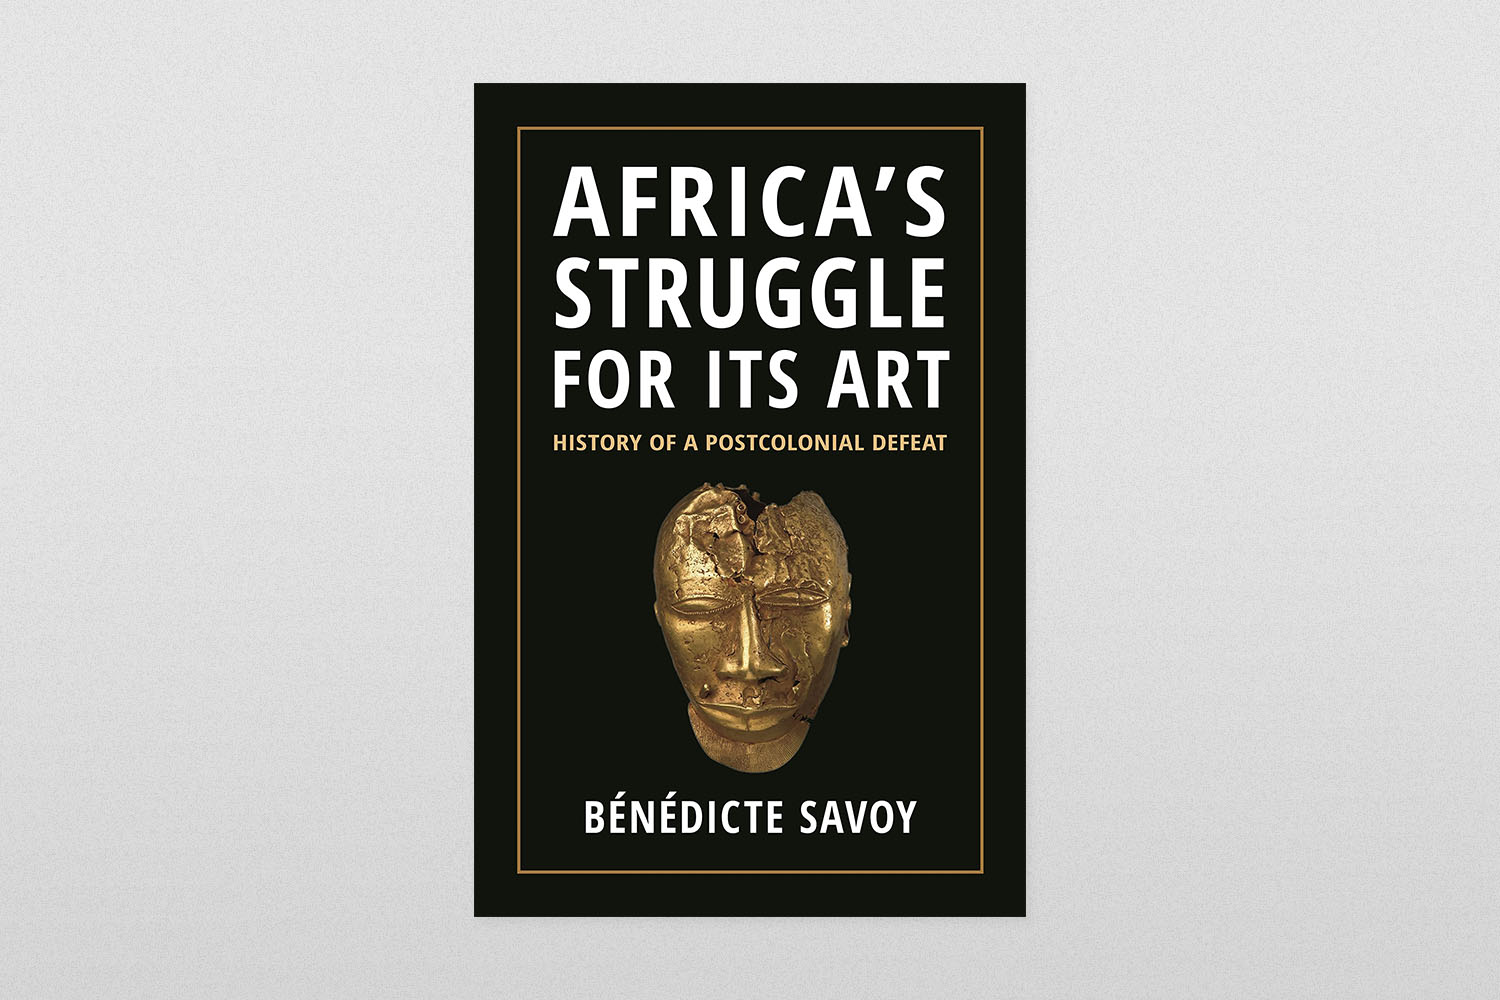 Africa's Struggle for Its Art- History of a Postcolonial Defeat by Bénédicte Savoy